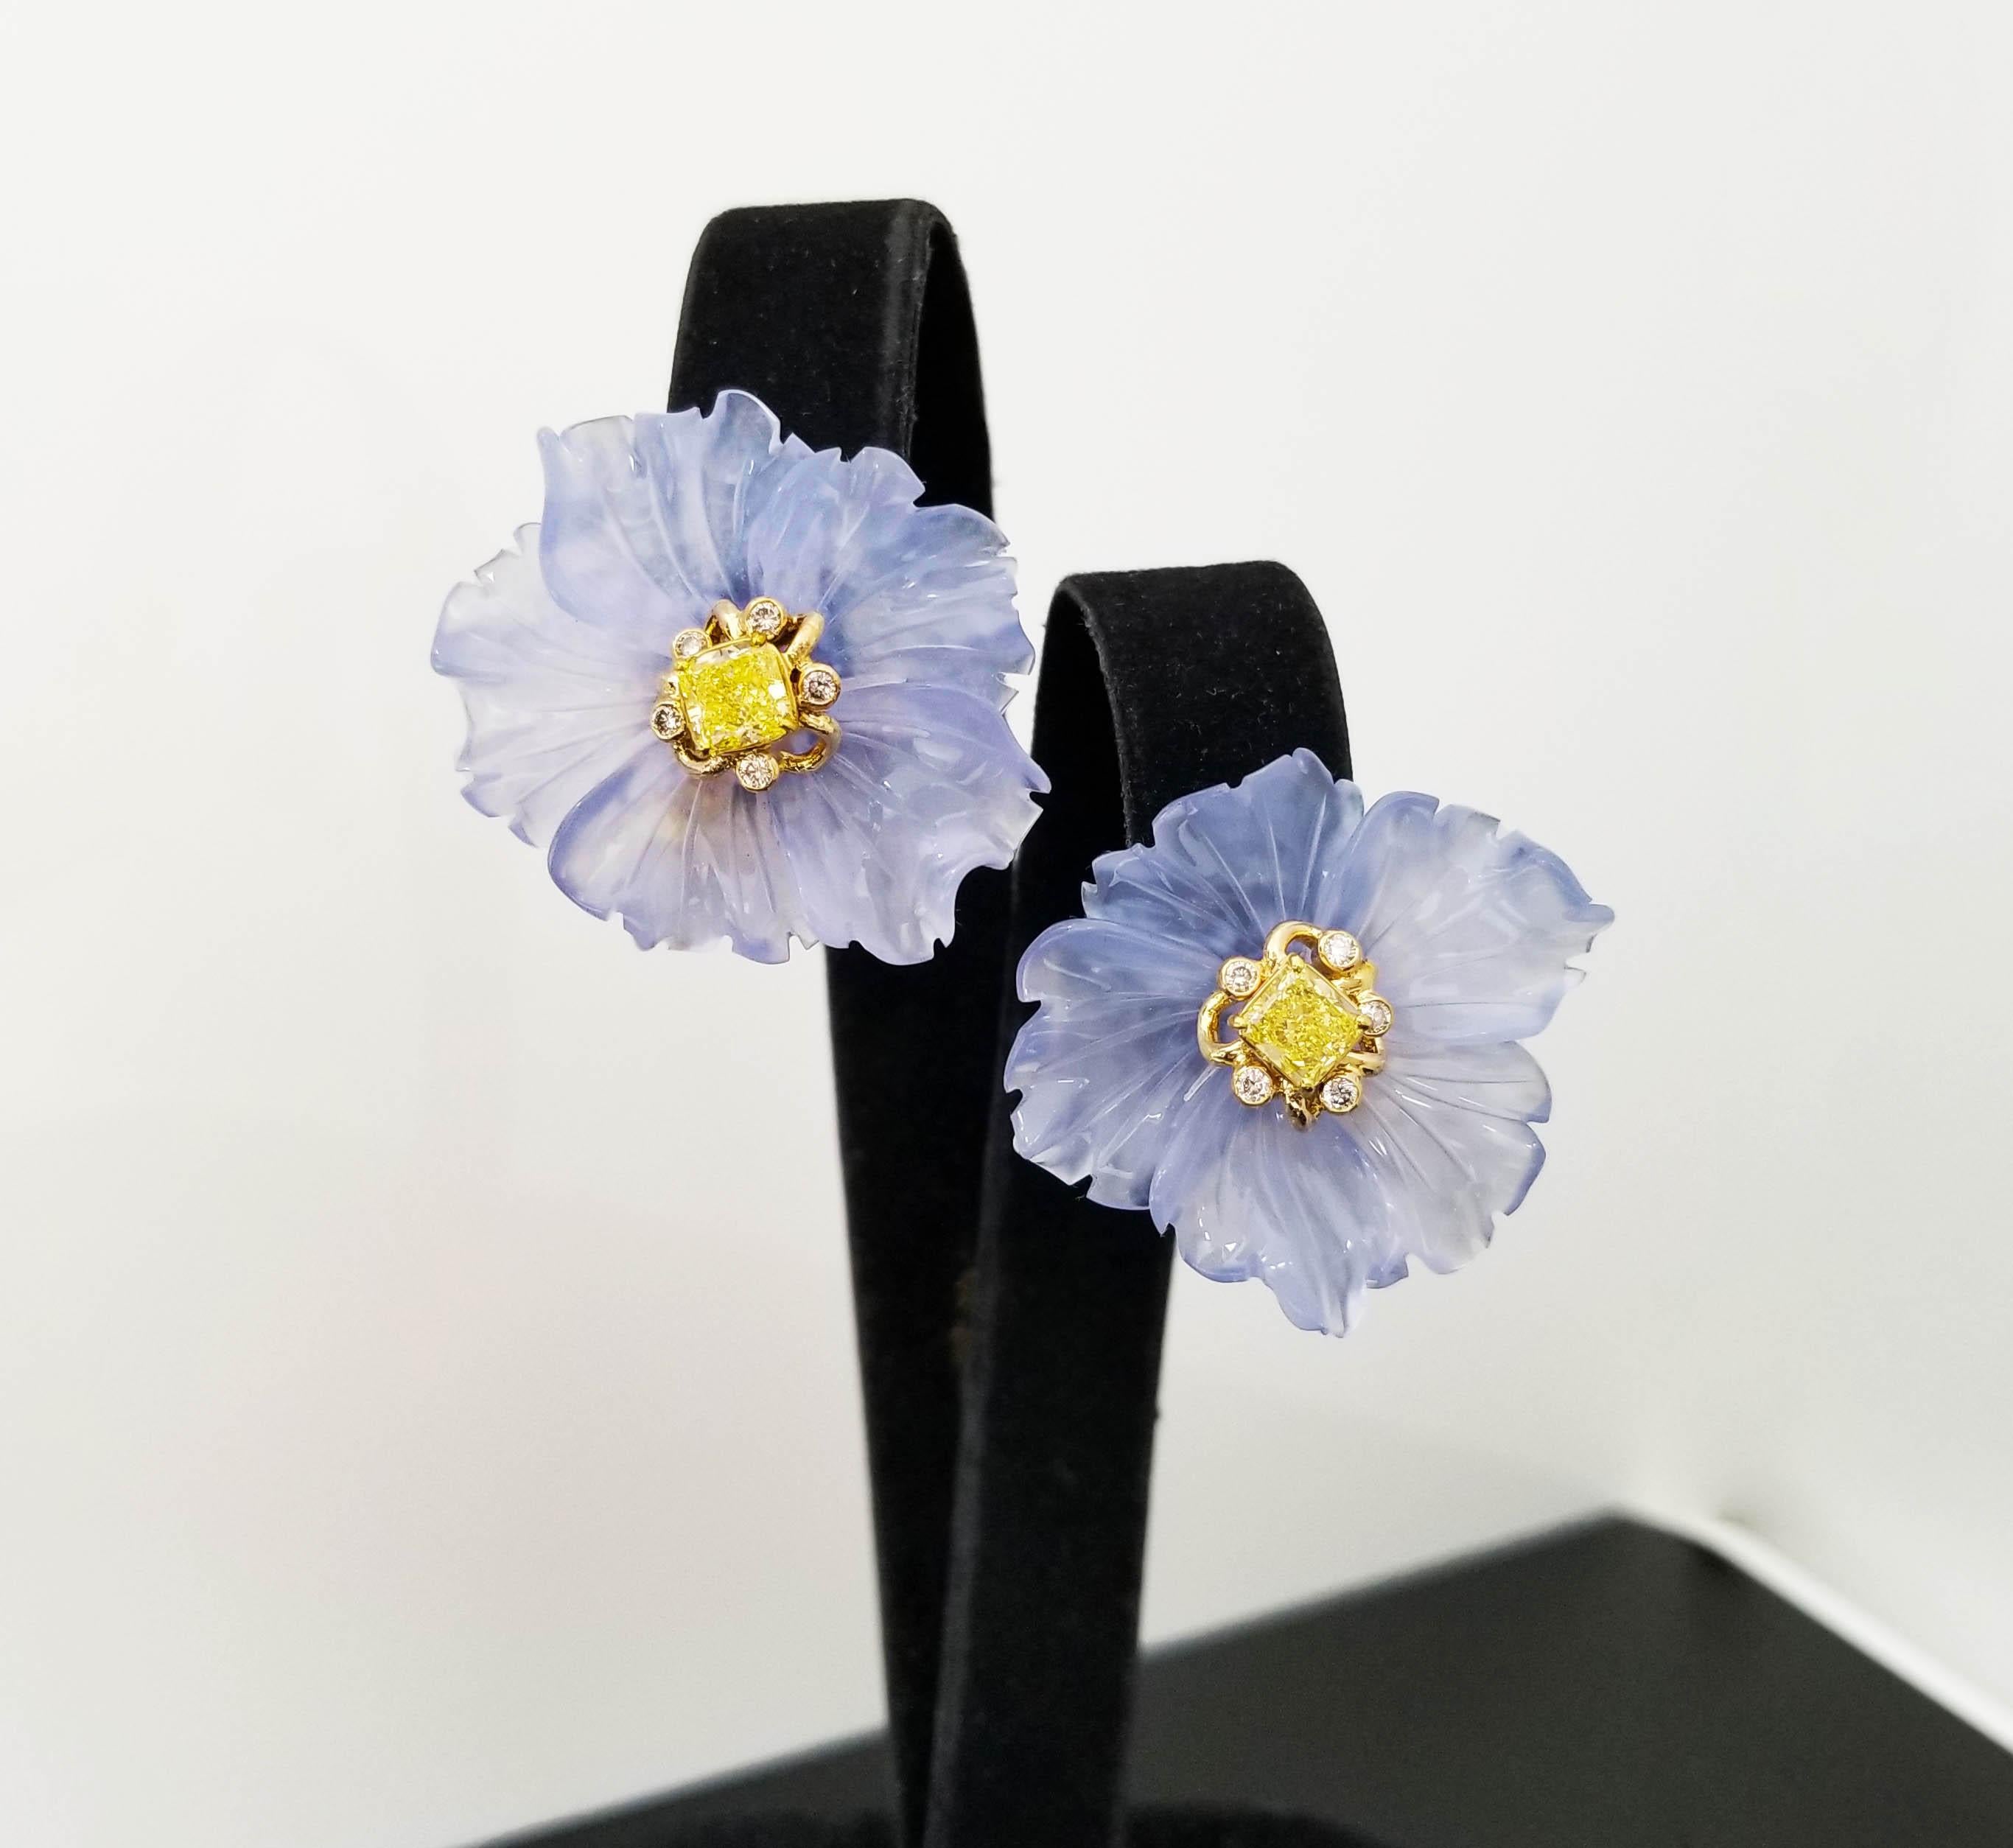 
Scarselli x Rebecca Koven Floral Inspired Clip On Earrings with GIA-Certified Fancy Intense Yellow Diamonds. A collaboration between Scarselli and Jewelry Designer Rebecca Koven, these earrings are made using 18k Yellow Gold, 1.44 carats of